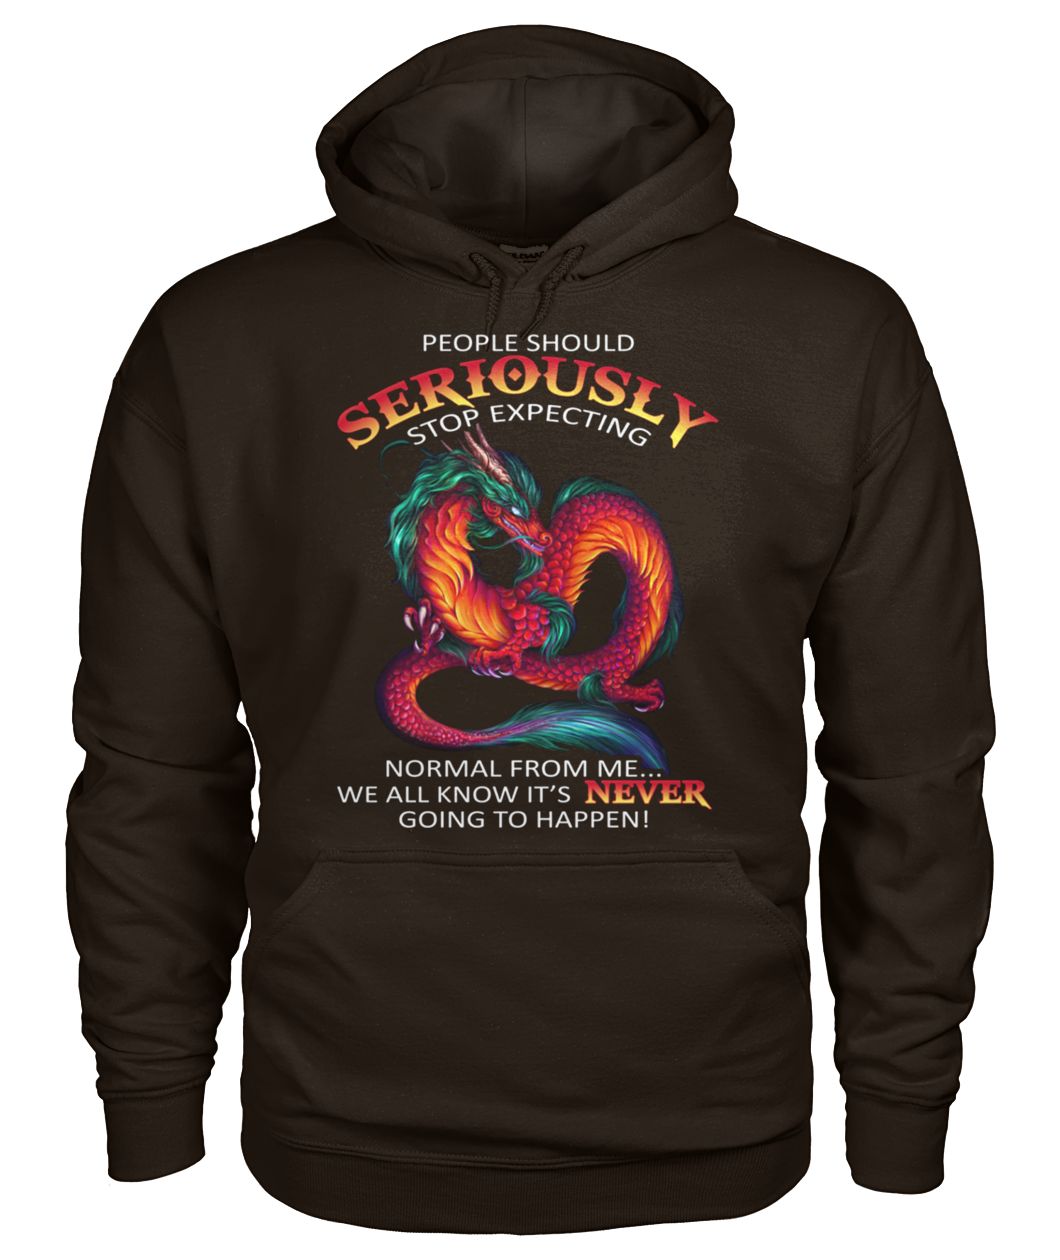 Red dragon people should seriously stop expecting normal from me gildan hoodie